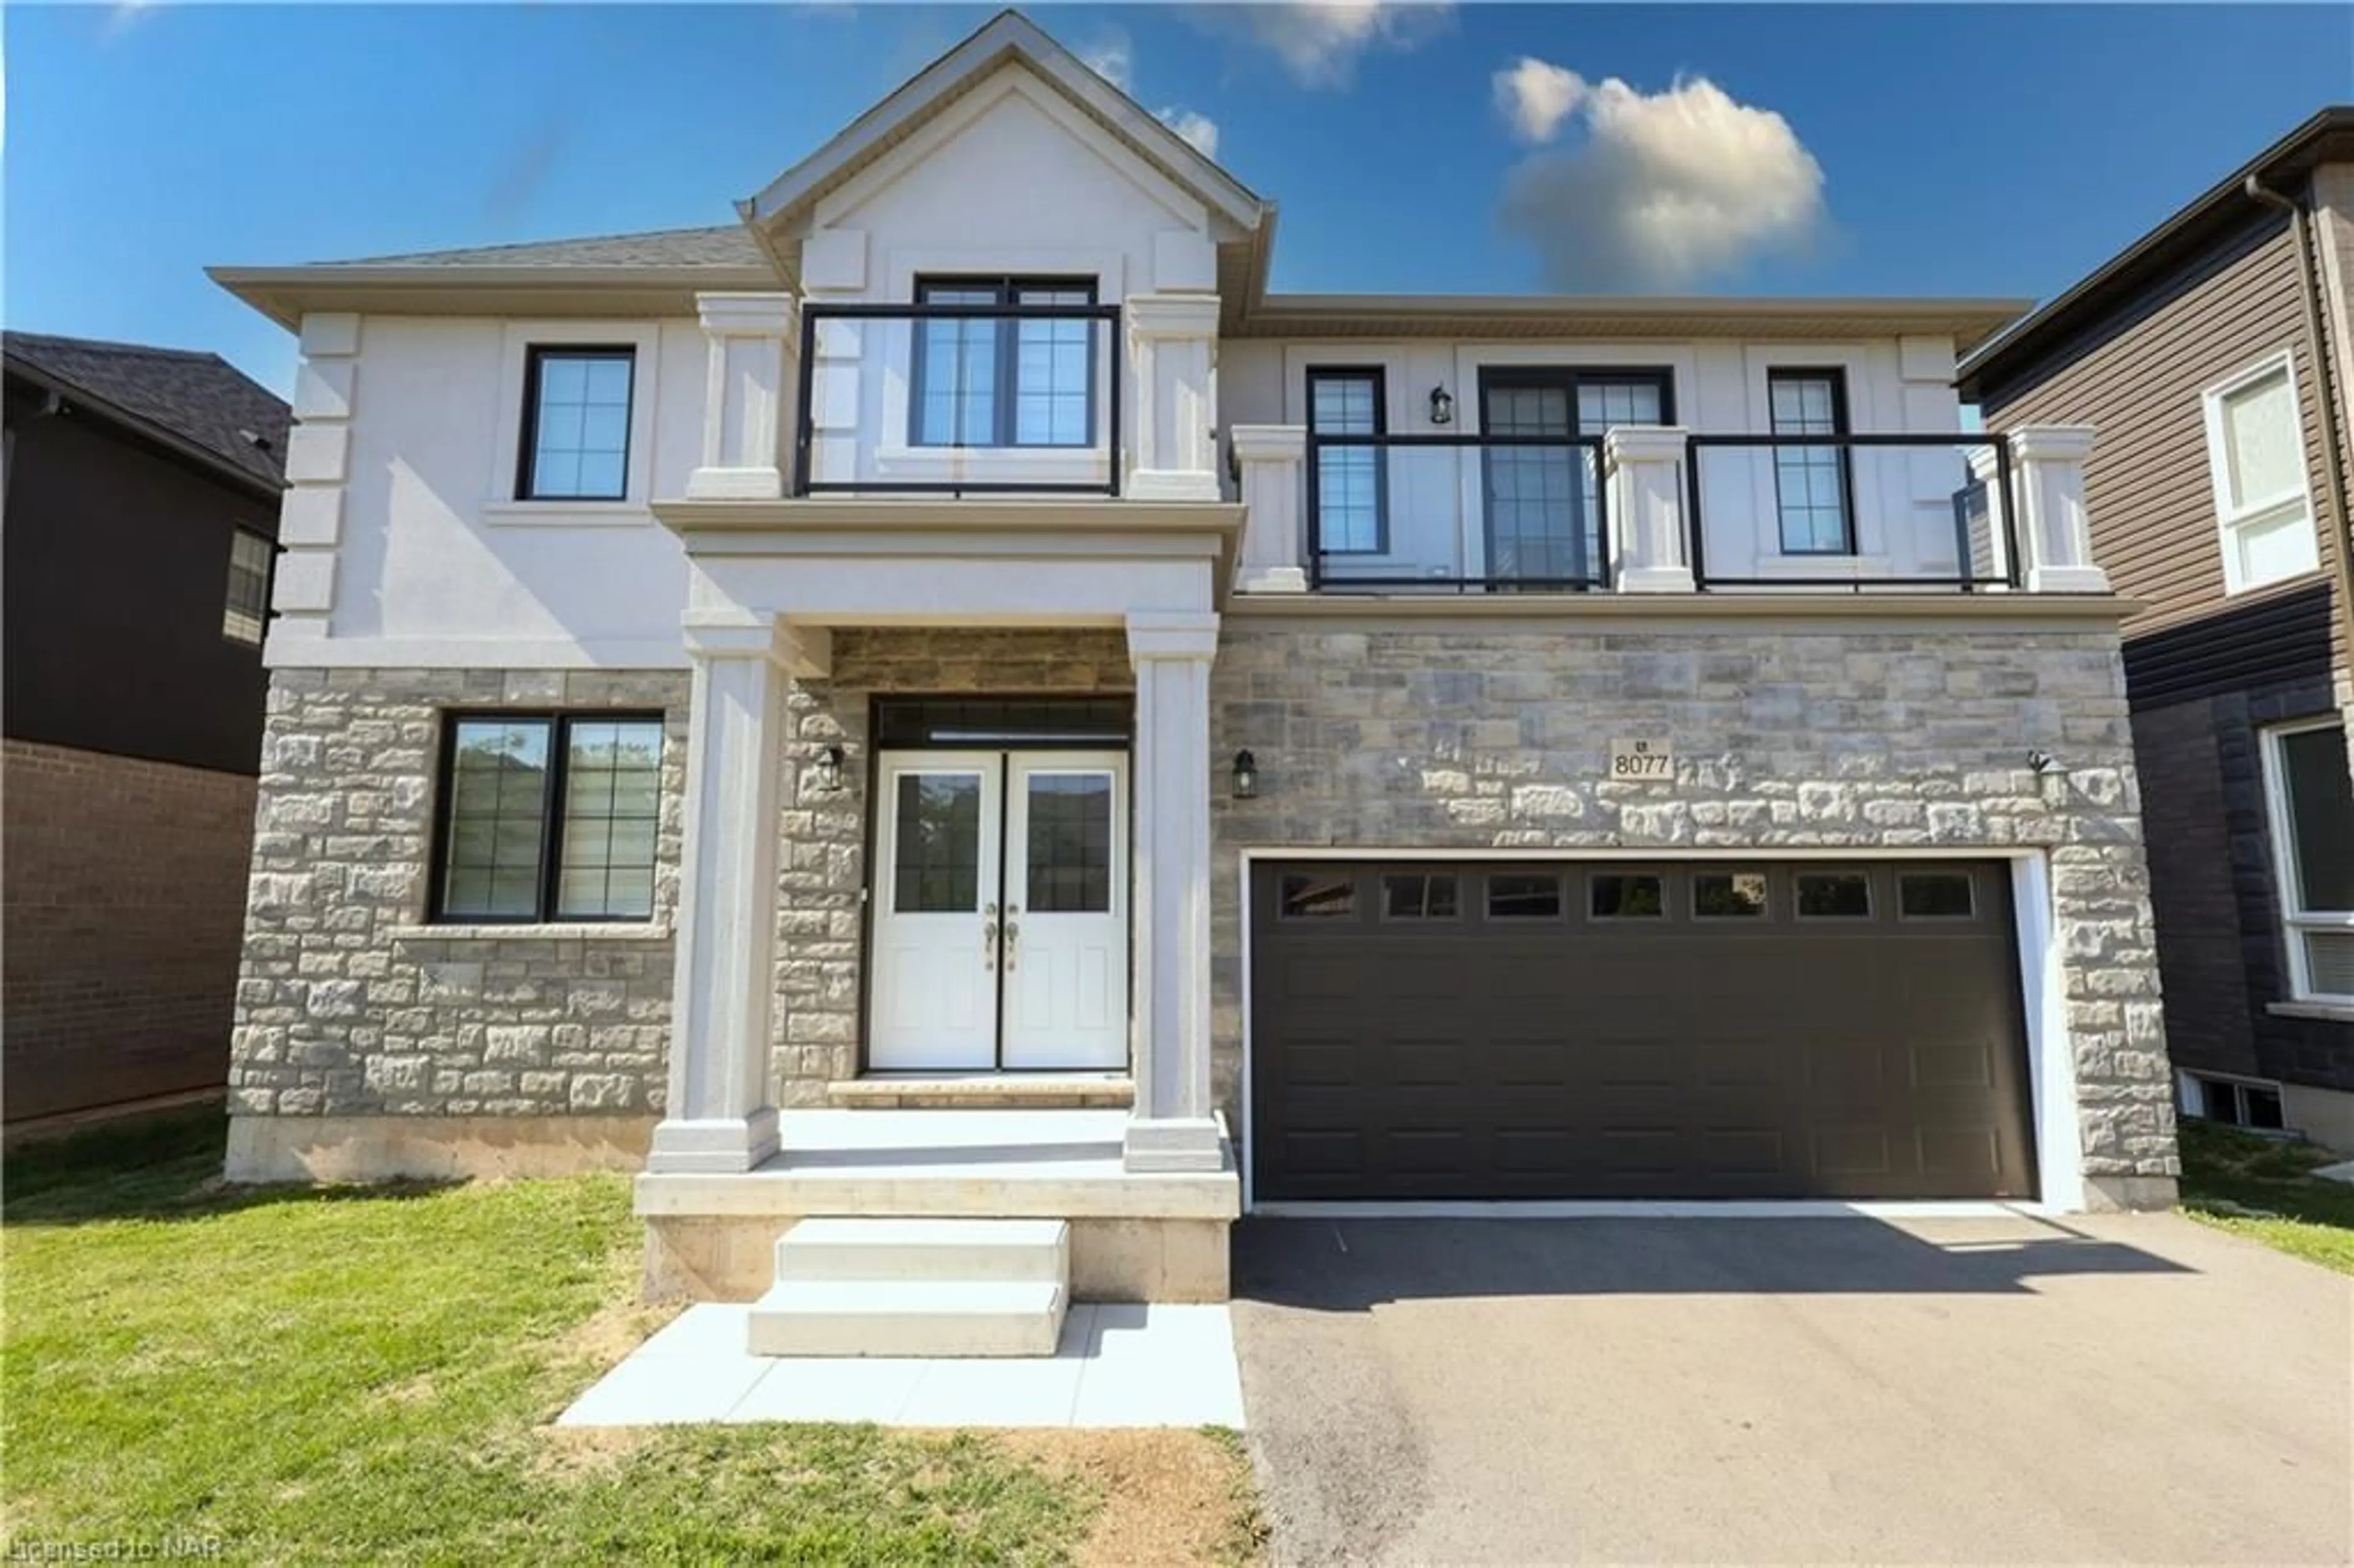 Home with brick exterior material for 8077 Brookside Dr, Niagara Falls Ontario L2H 3T9